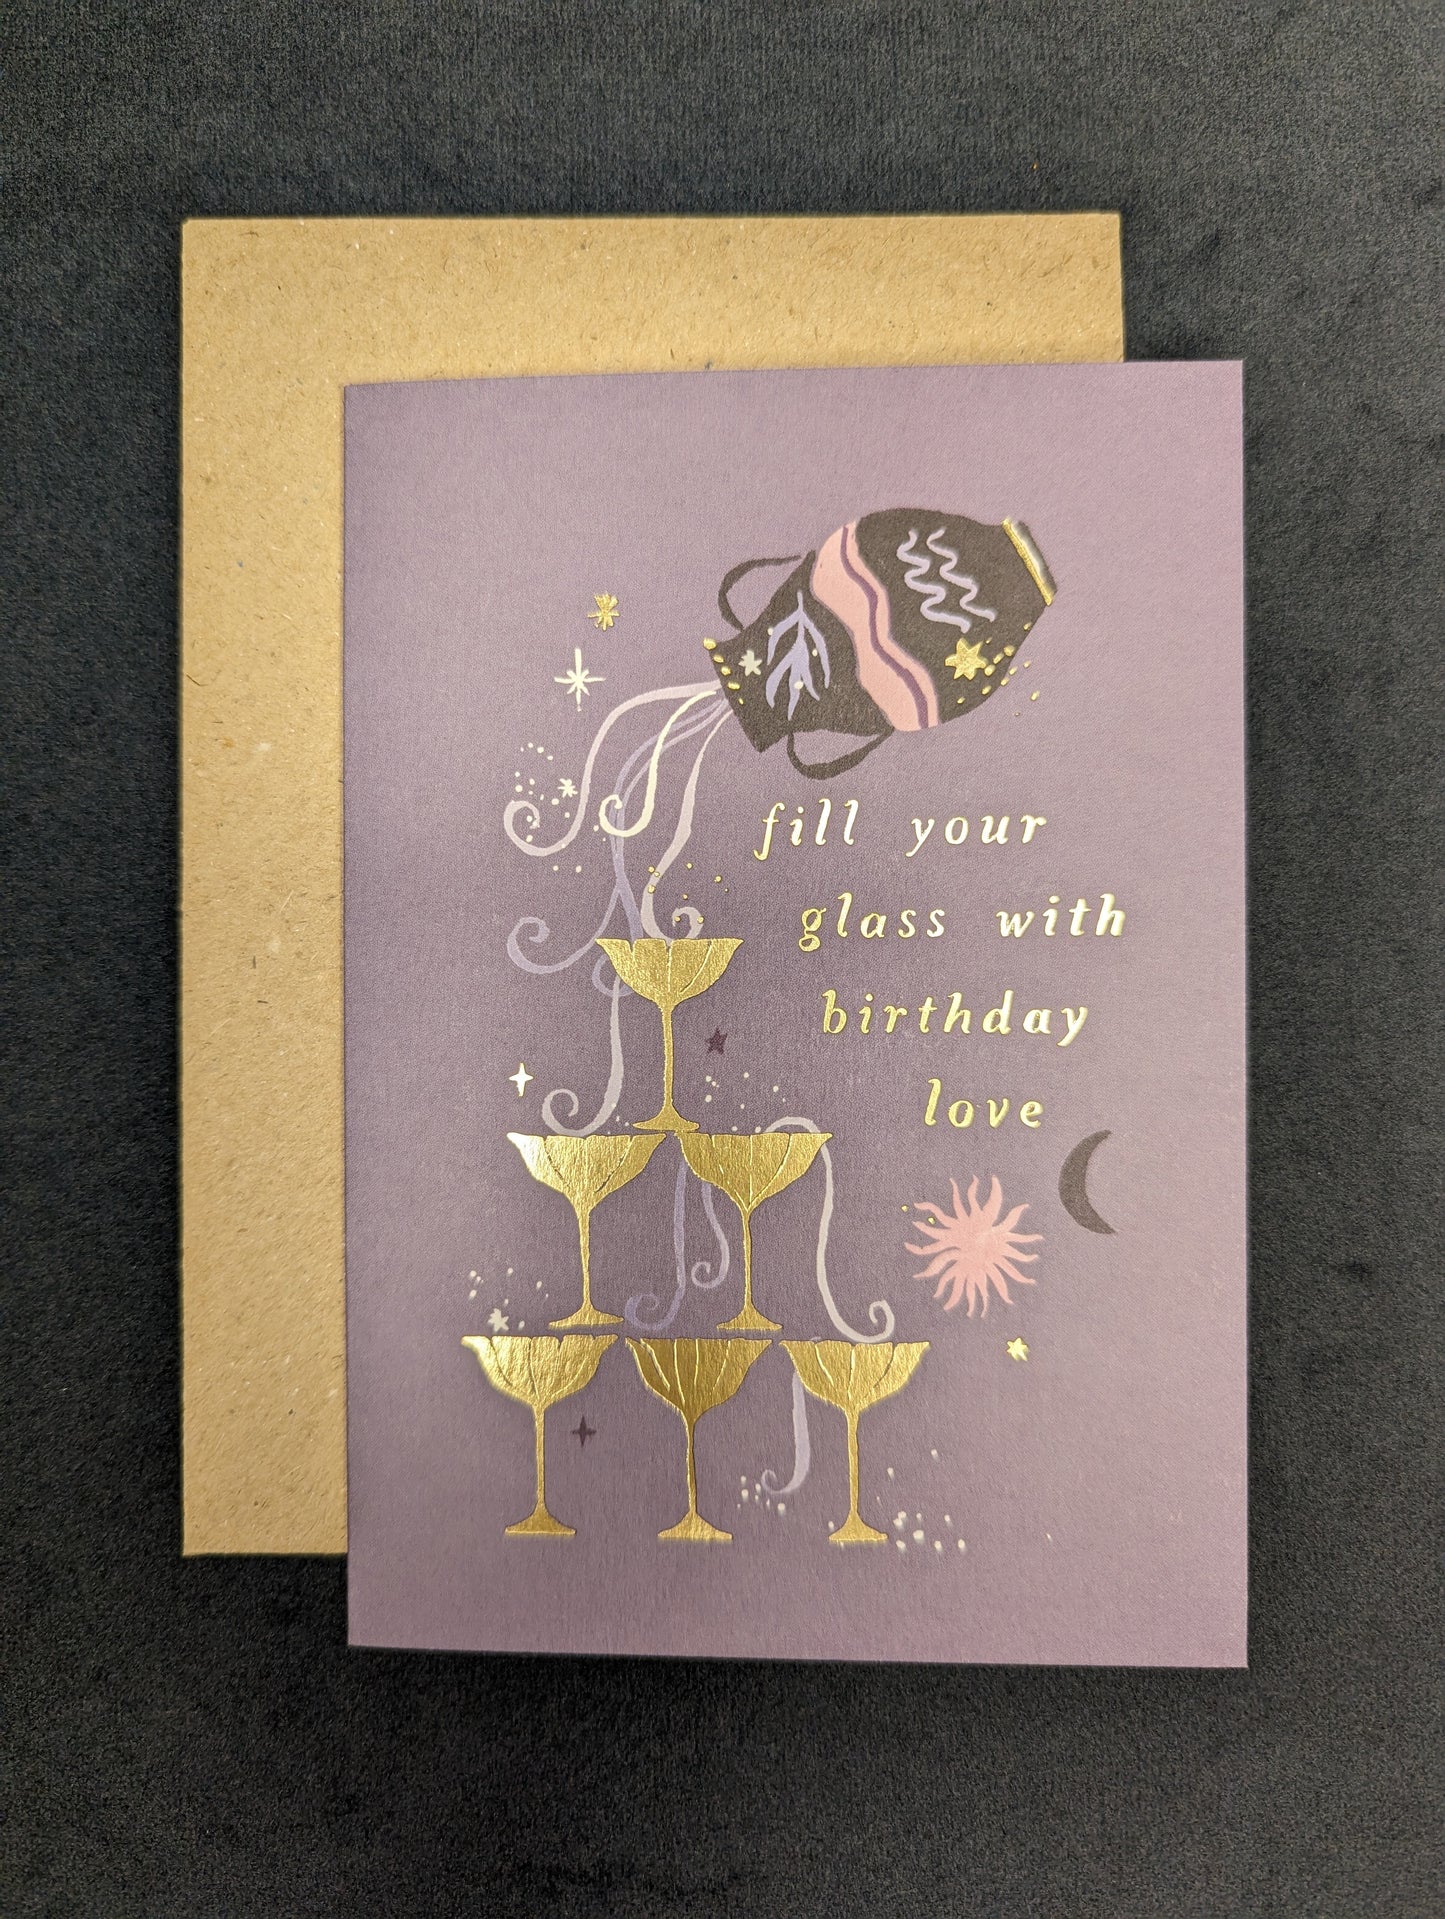 ‘Fill your glass with birthday love’ Greeting Card